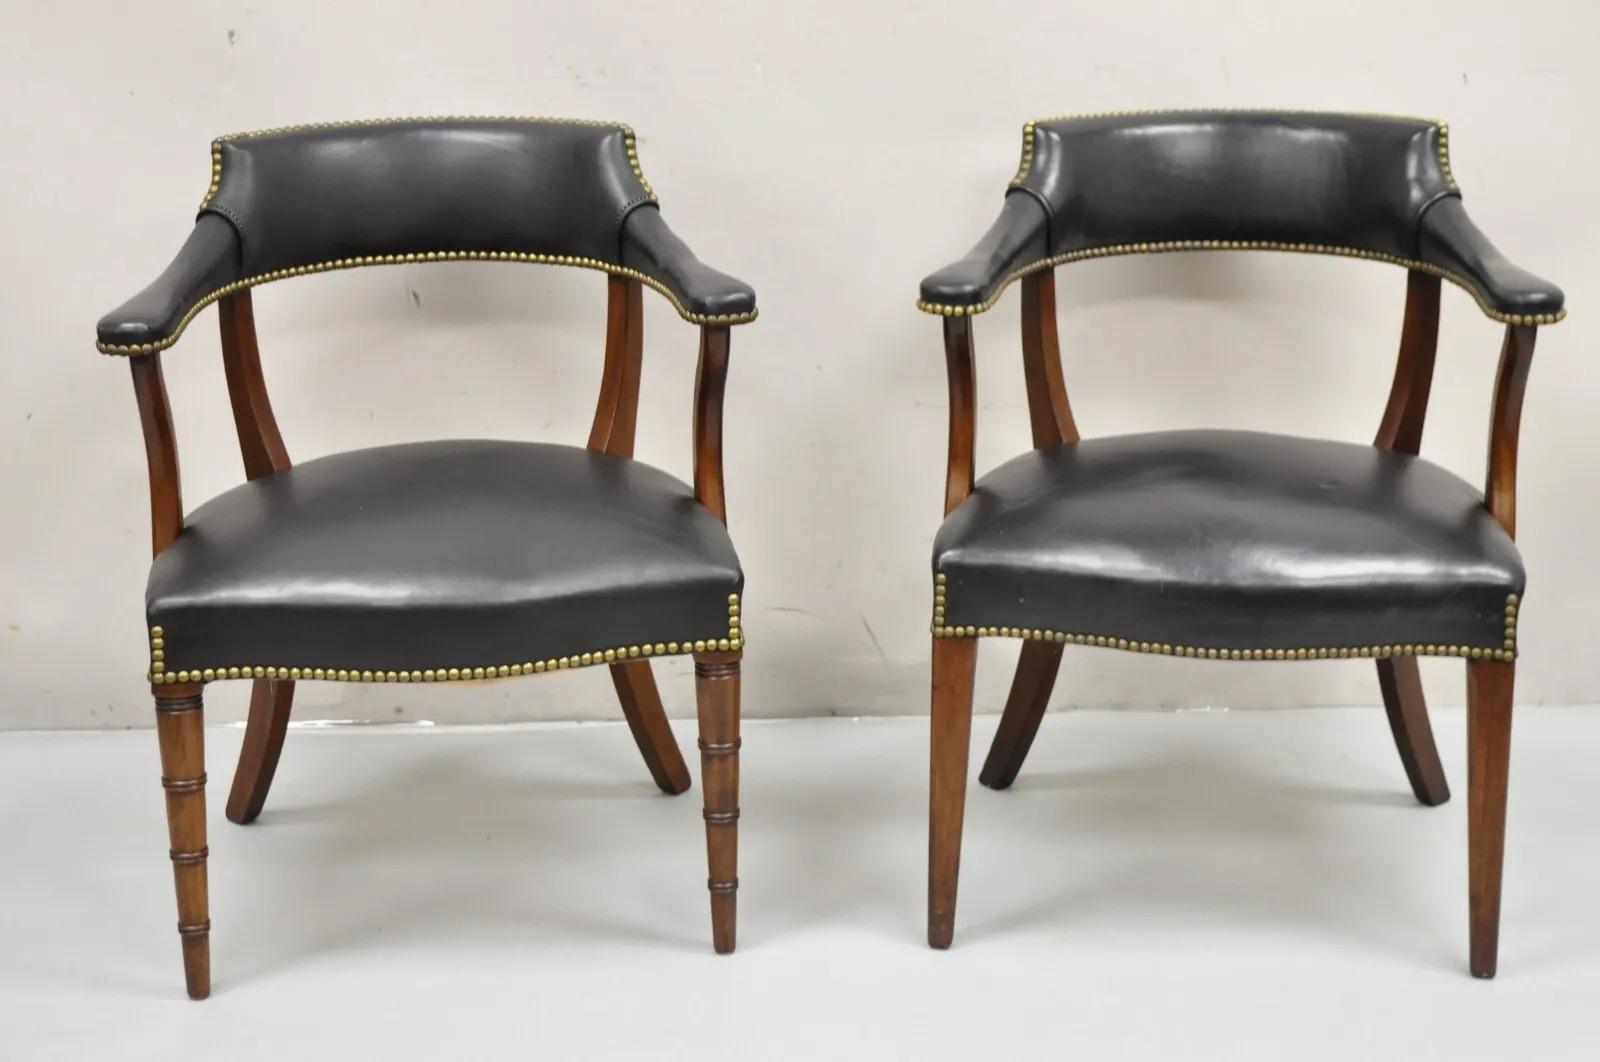 Hickory Chair Co Regency Style Mahogany & Black Leather Club Arm Chairs - a Pair. Item features two comparable chairs with variation in the leg carvings. One chair with faux bamboo carved legs and the other with straight carved legs. Both with solid